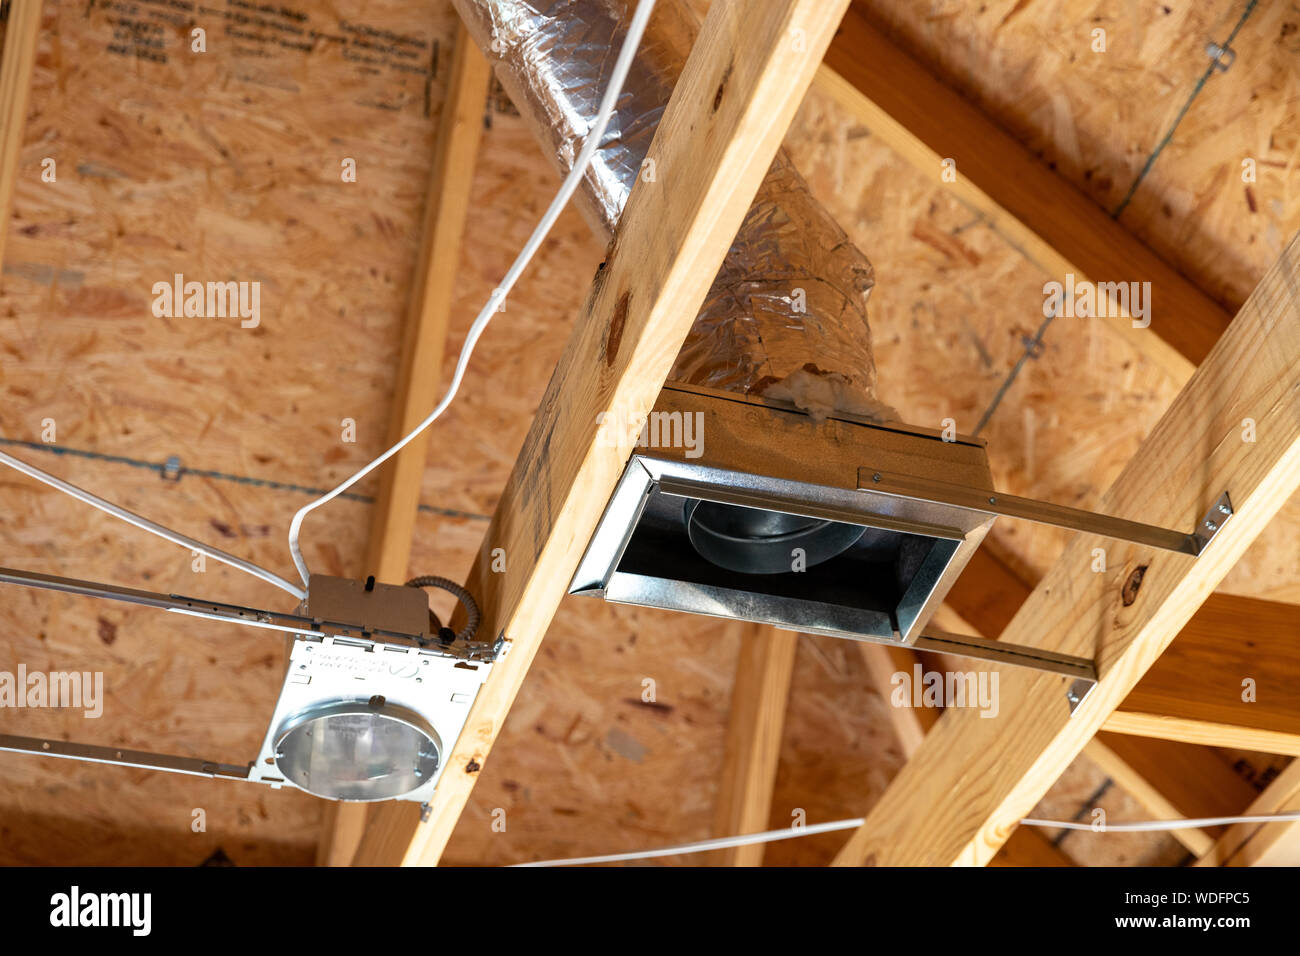 Air Conditioner vents in new home construction Stock Photo